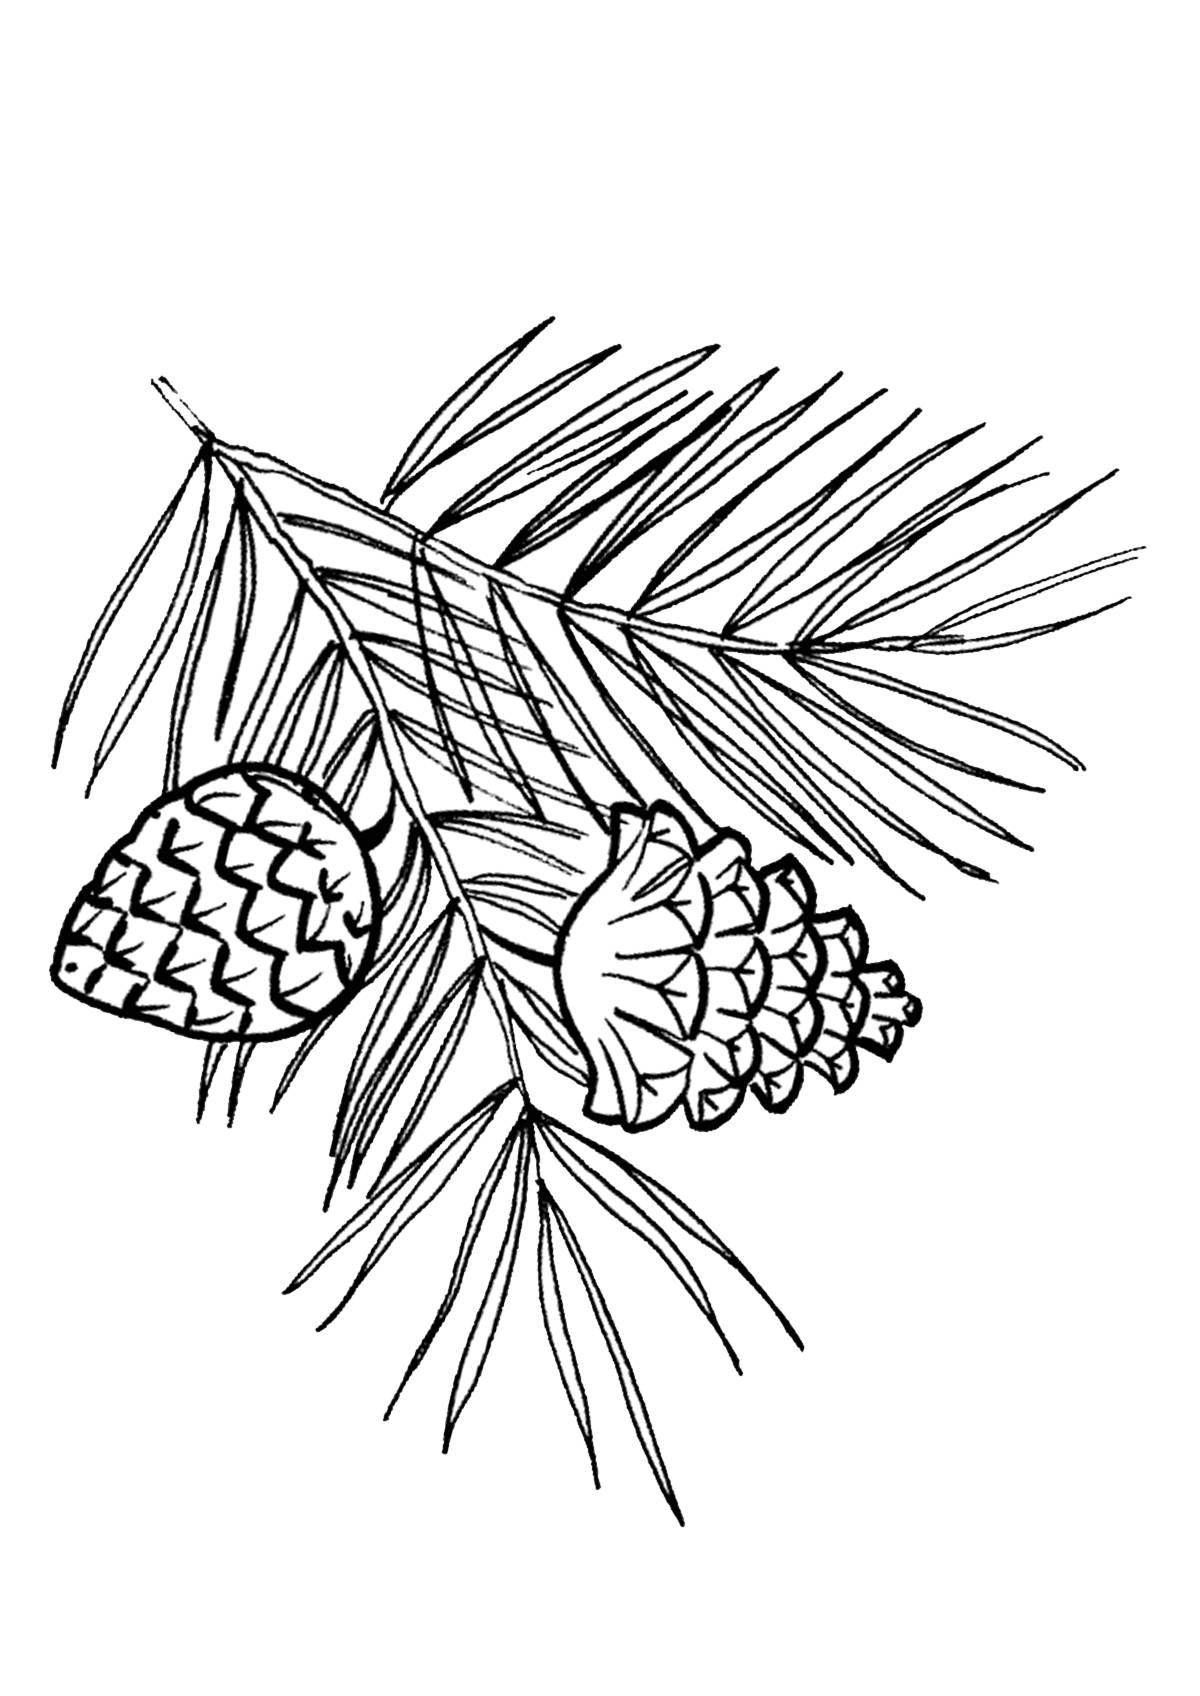 Amazing spruce branch coloring page